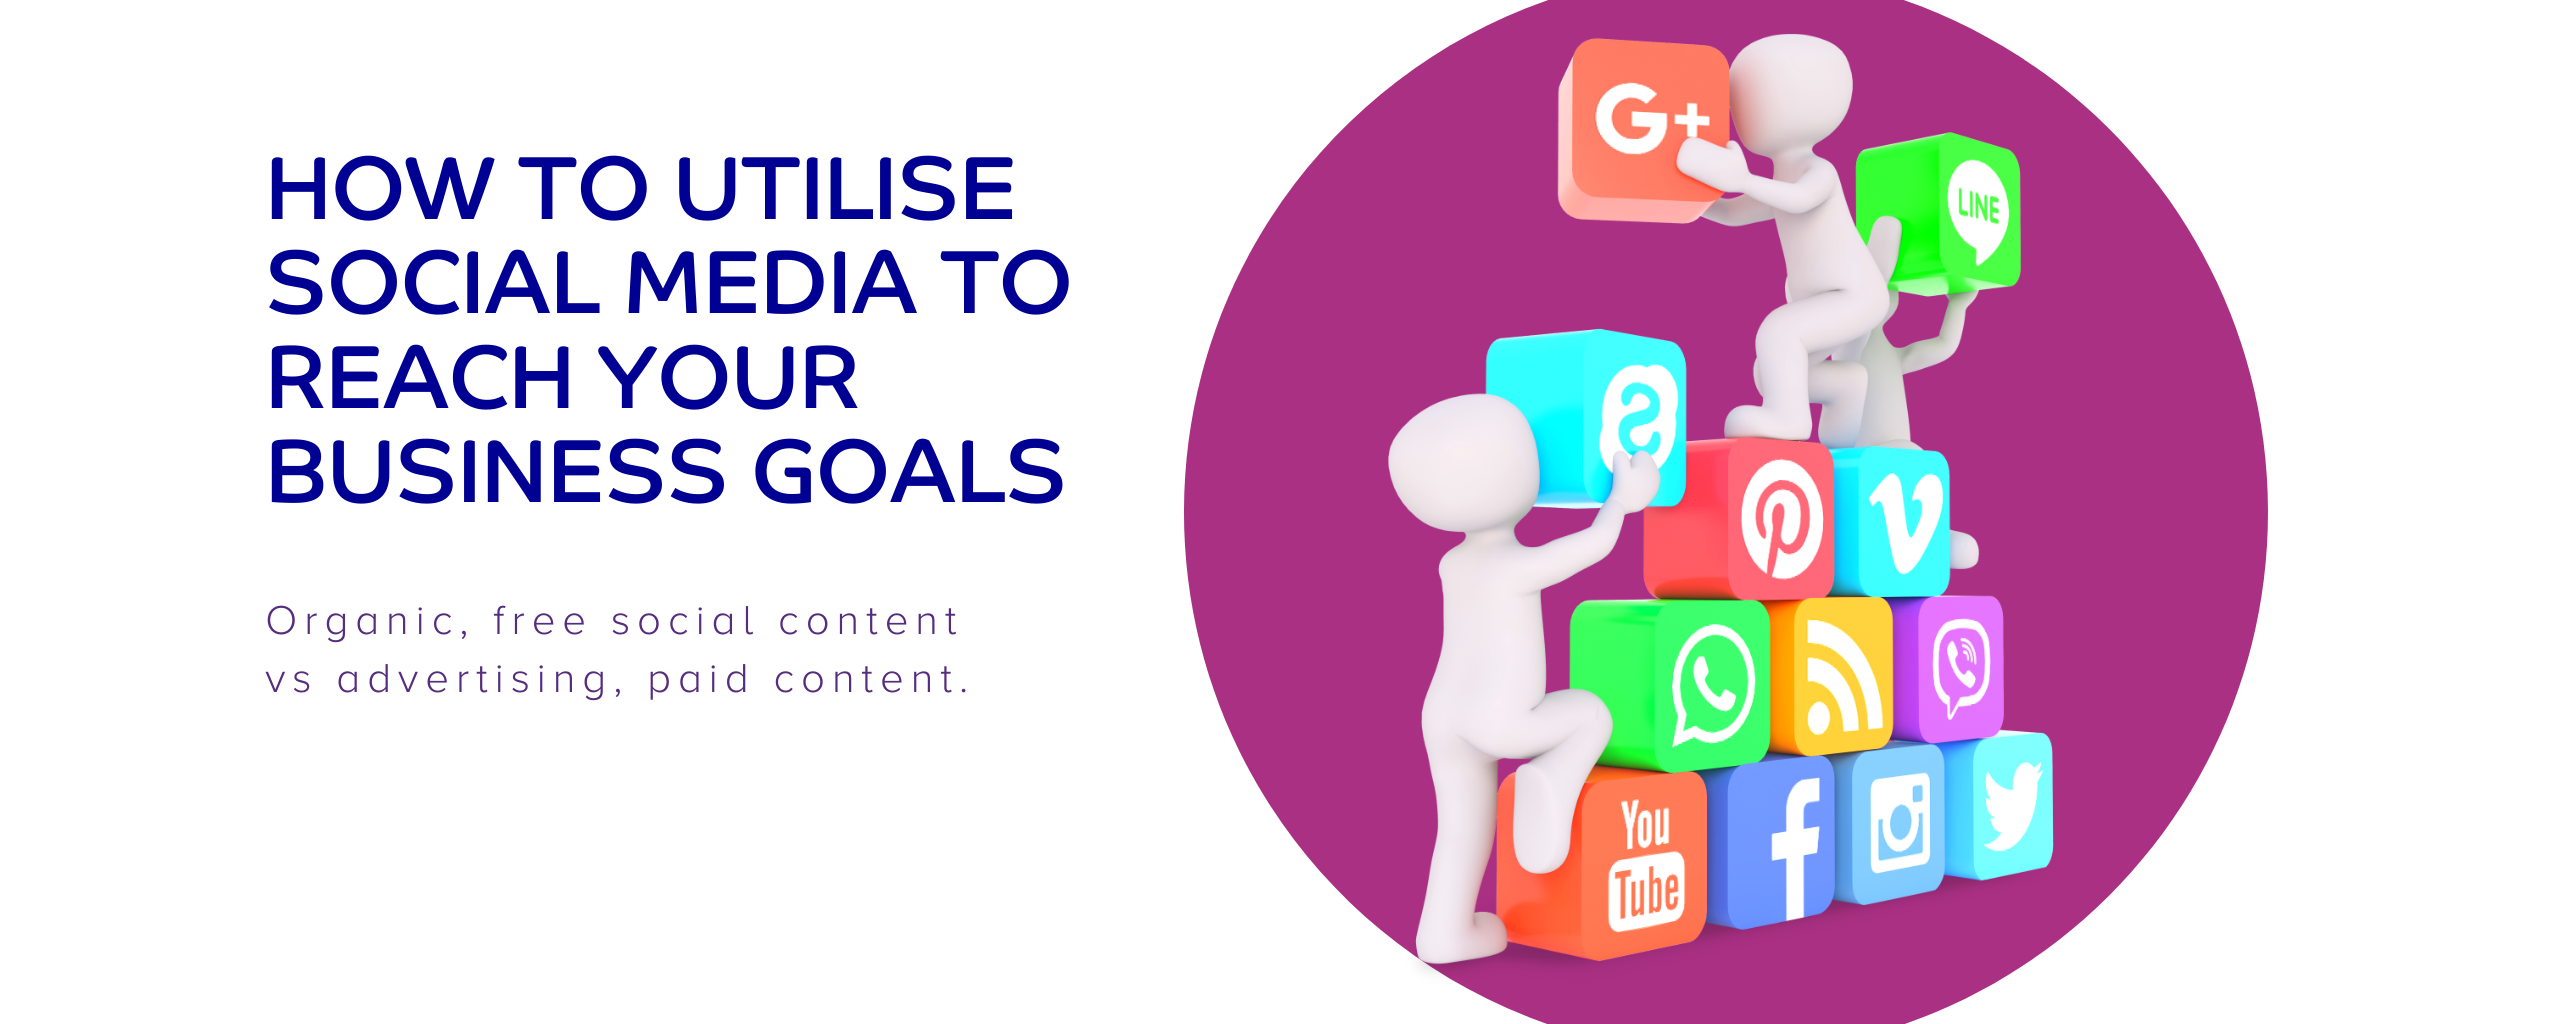 How to utilise social media to reach your business goals